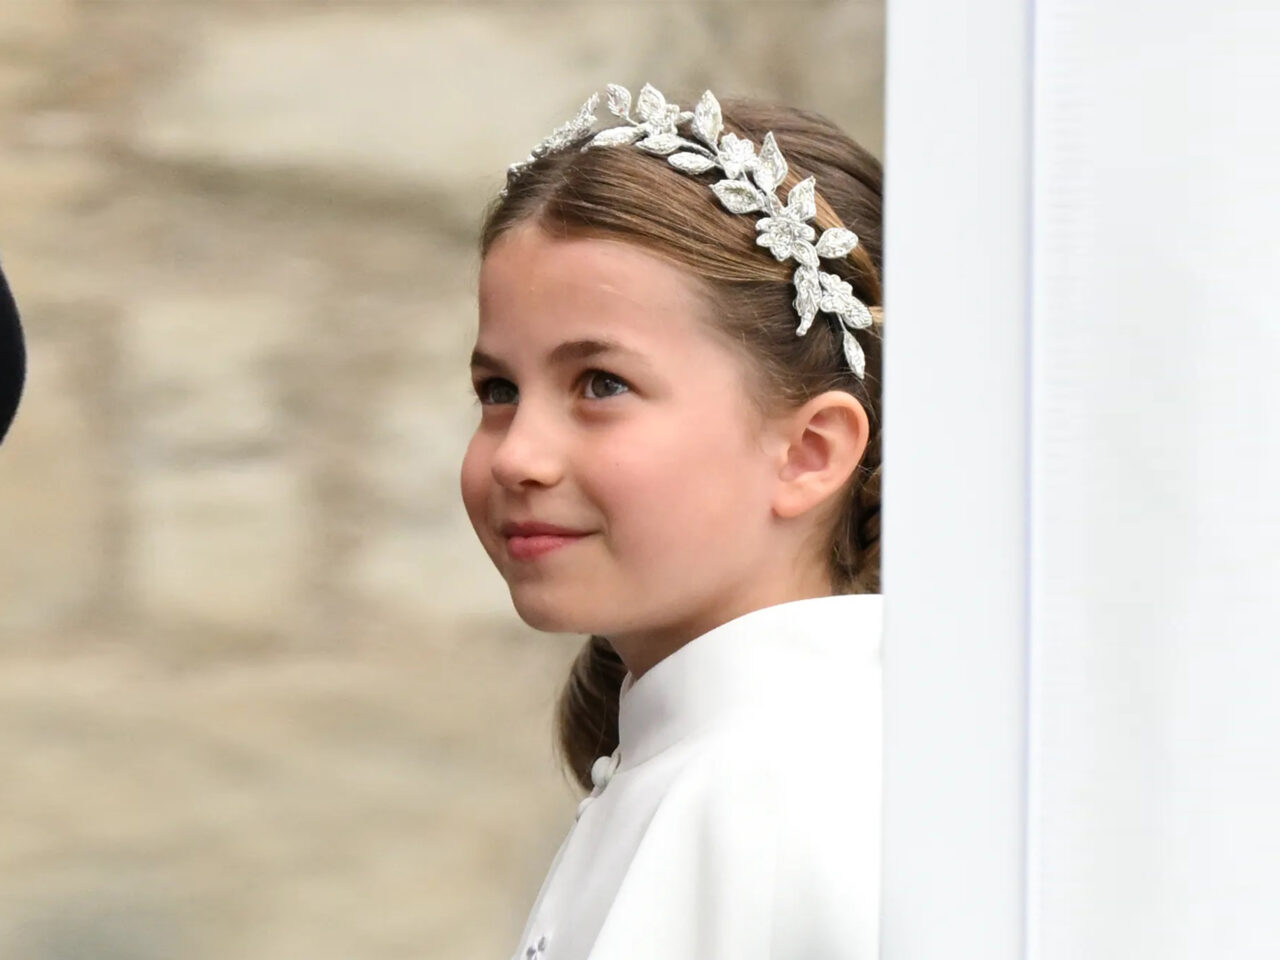 Princess Charlotte arrives at Westminster Abbey for the Coronation of King Charles III and Queen Camilla on May 06, 2023 in London, England.Karwai Tang/Getty Images